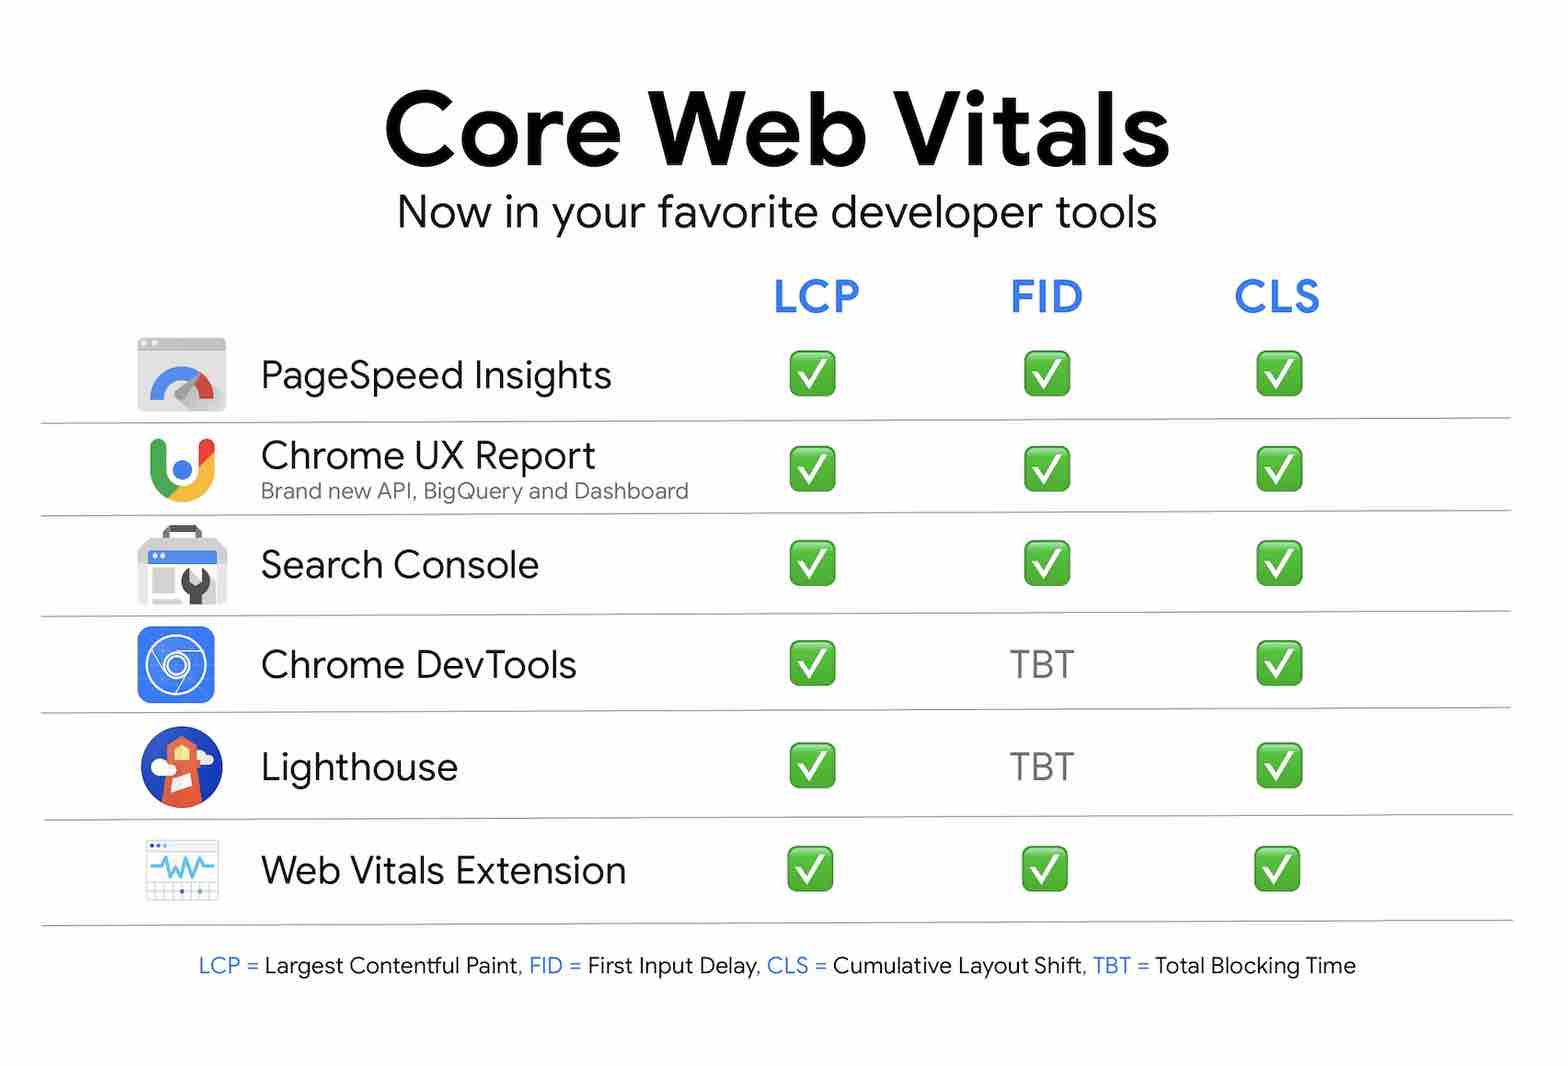 Google offers various tools to measure Core Web Vitals on WordPress.